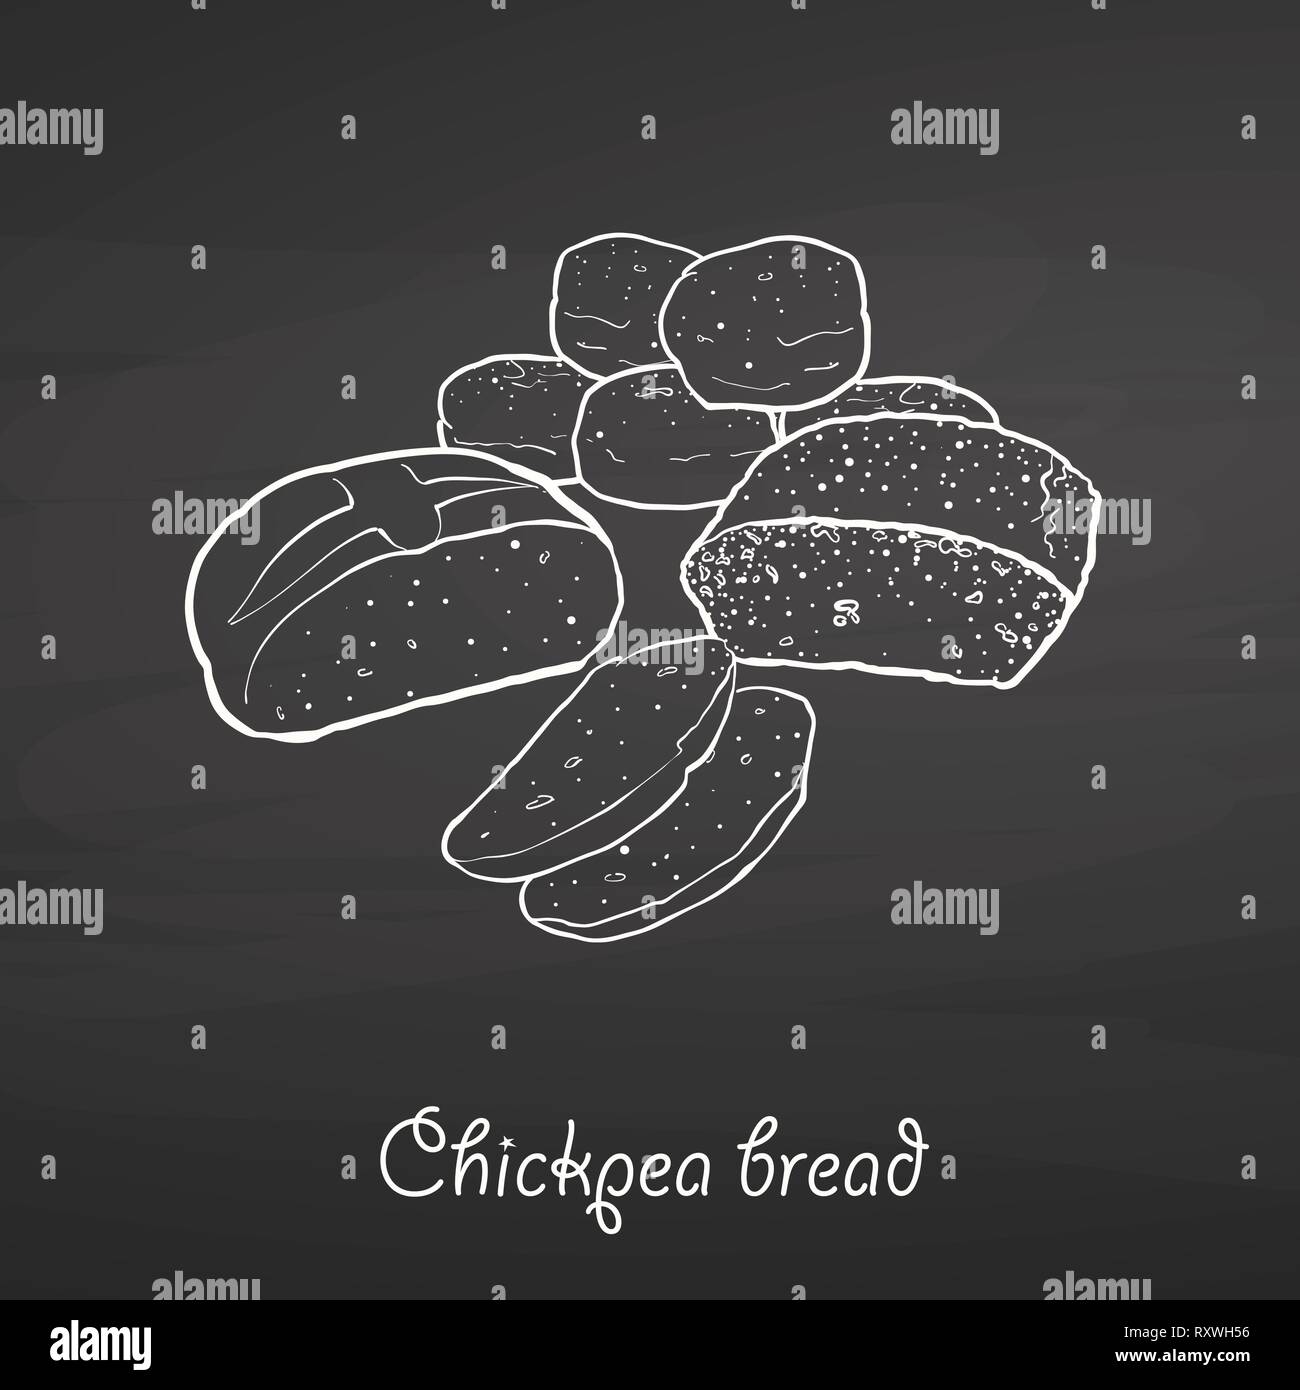 Chickpea bread food sketch on chalkboard. Vector drawing of Leavened, usually known in Albania and Turkey. Food illustration series. Stock Vector